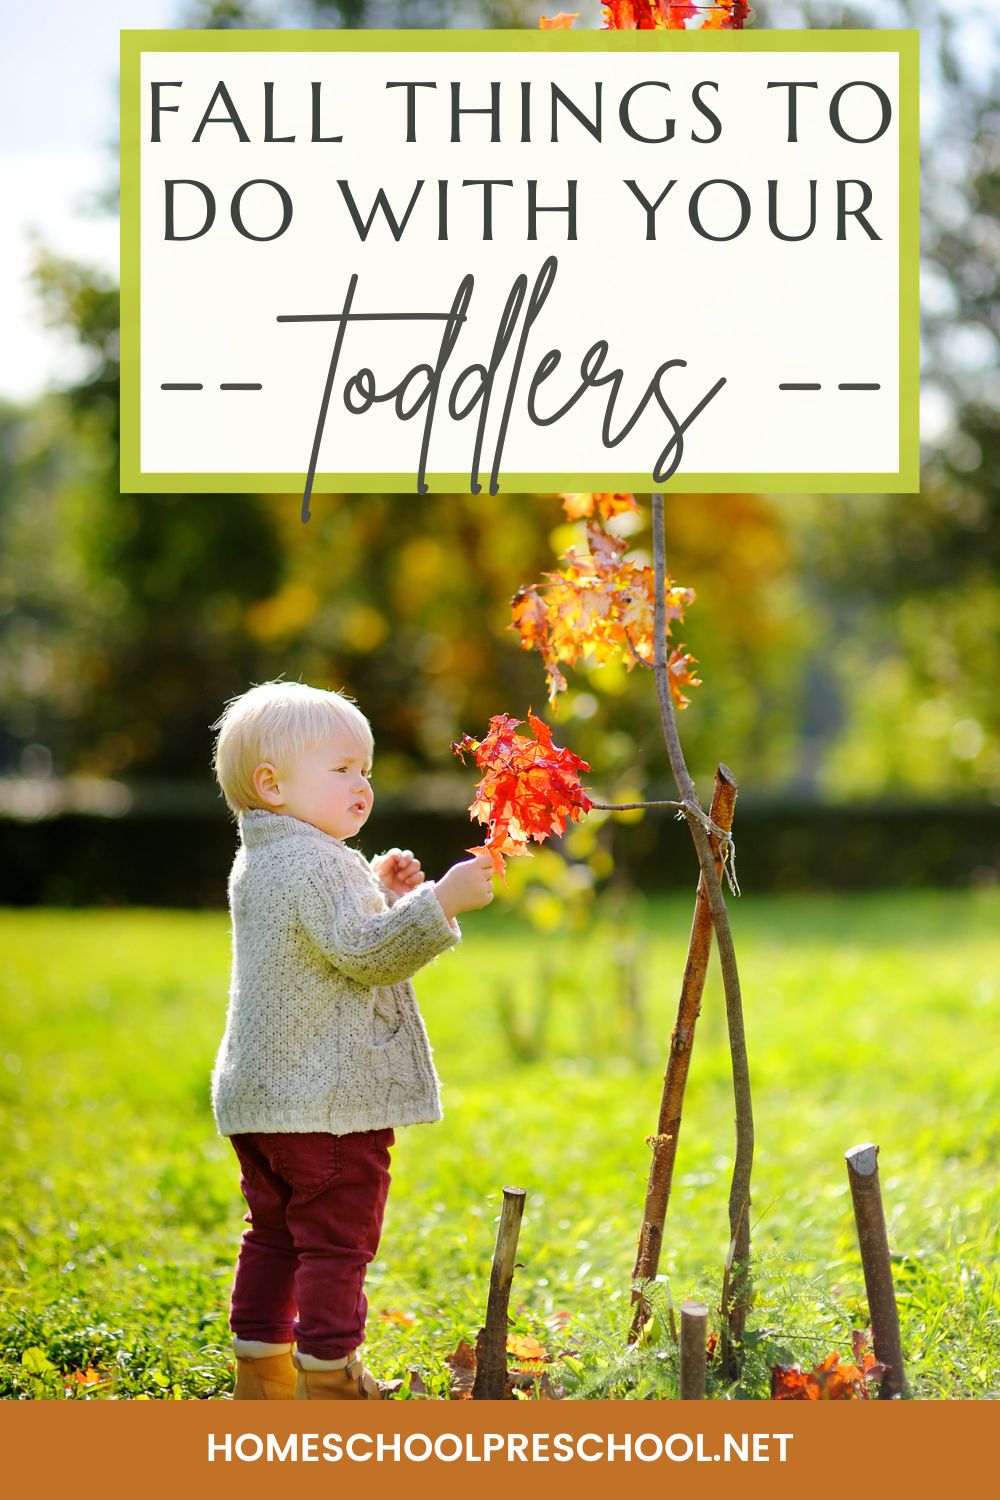 autumn-activities-for-toddlers-1 Fall Things to Do with Toddlers